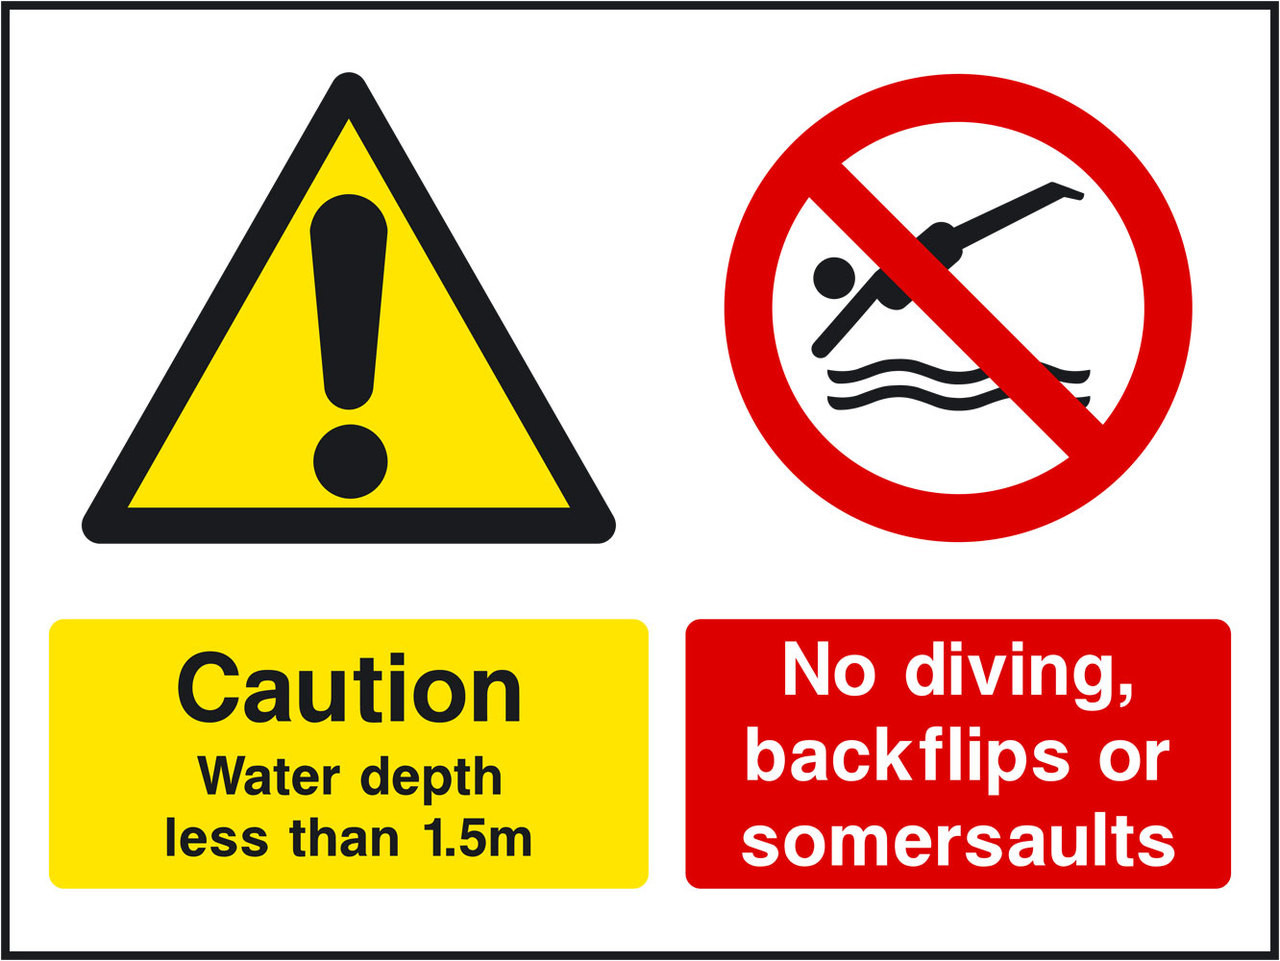 Caution water depth less than 1.5m No diving